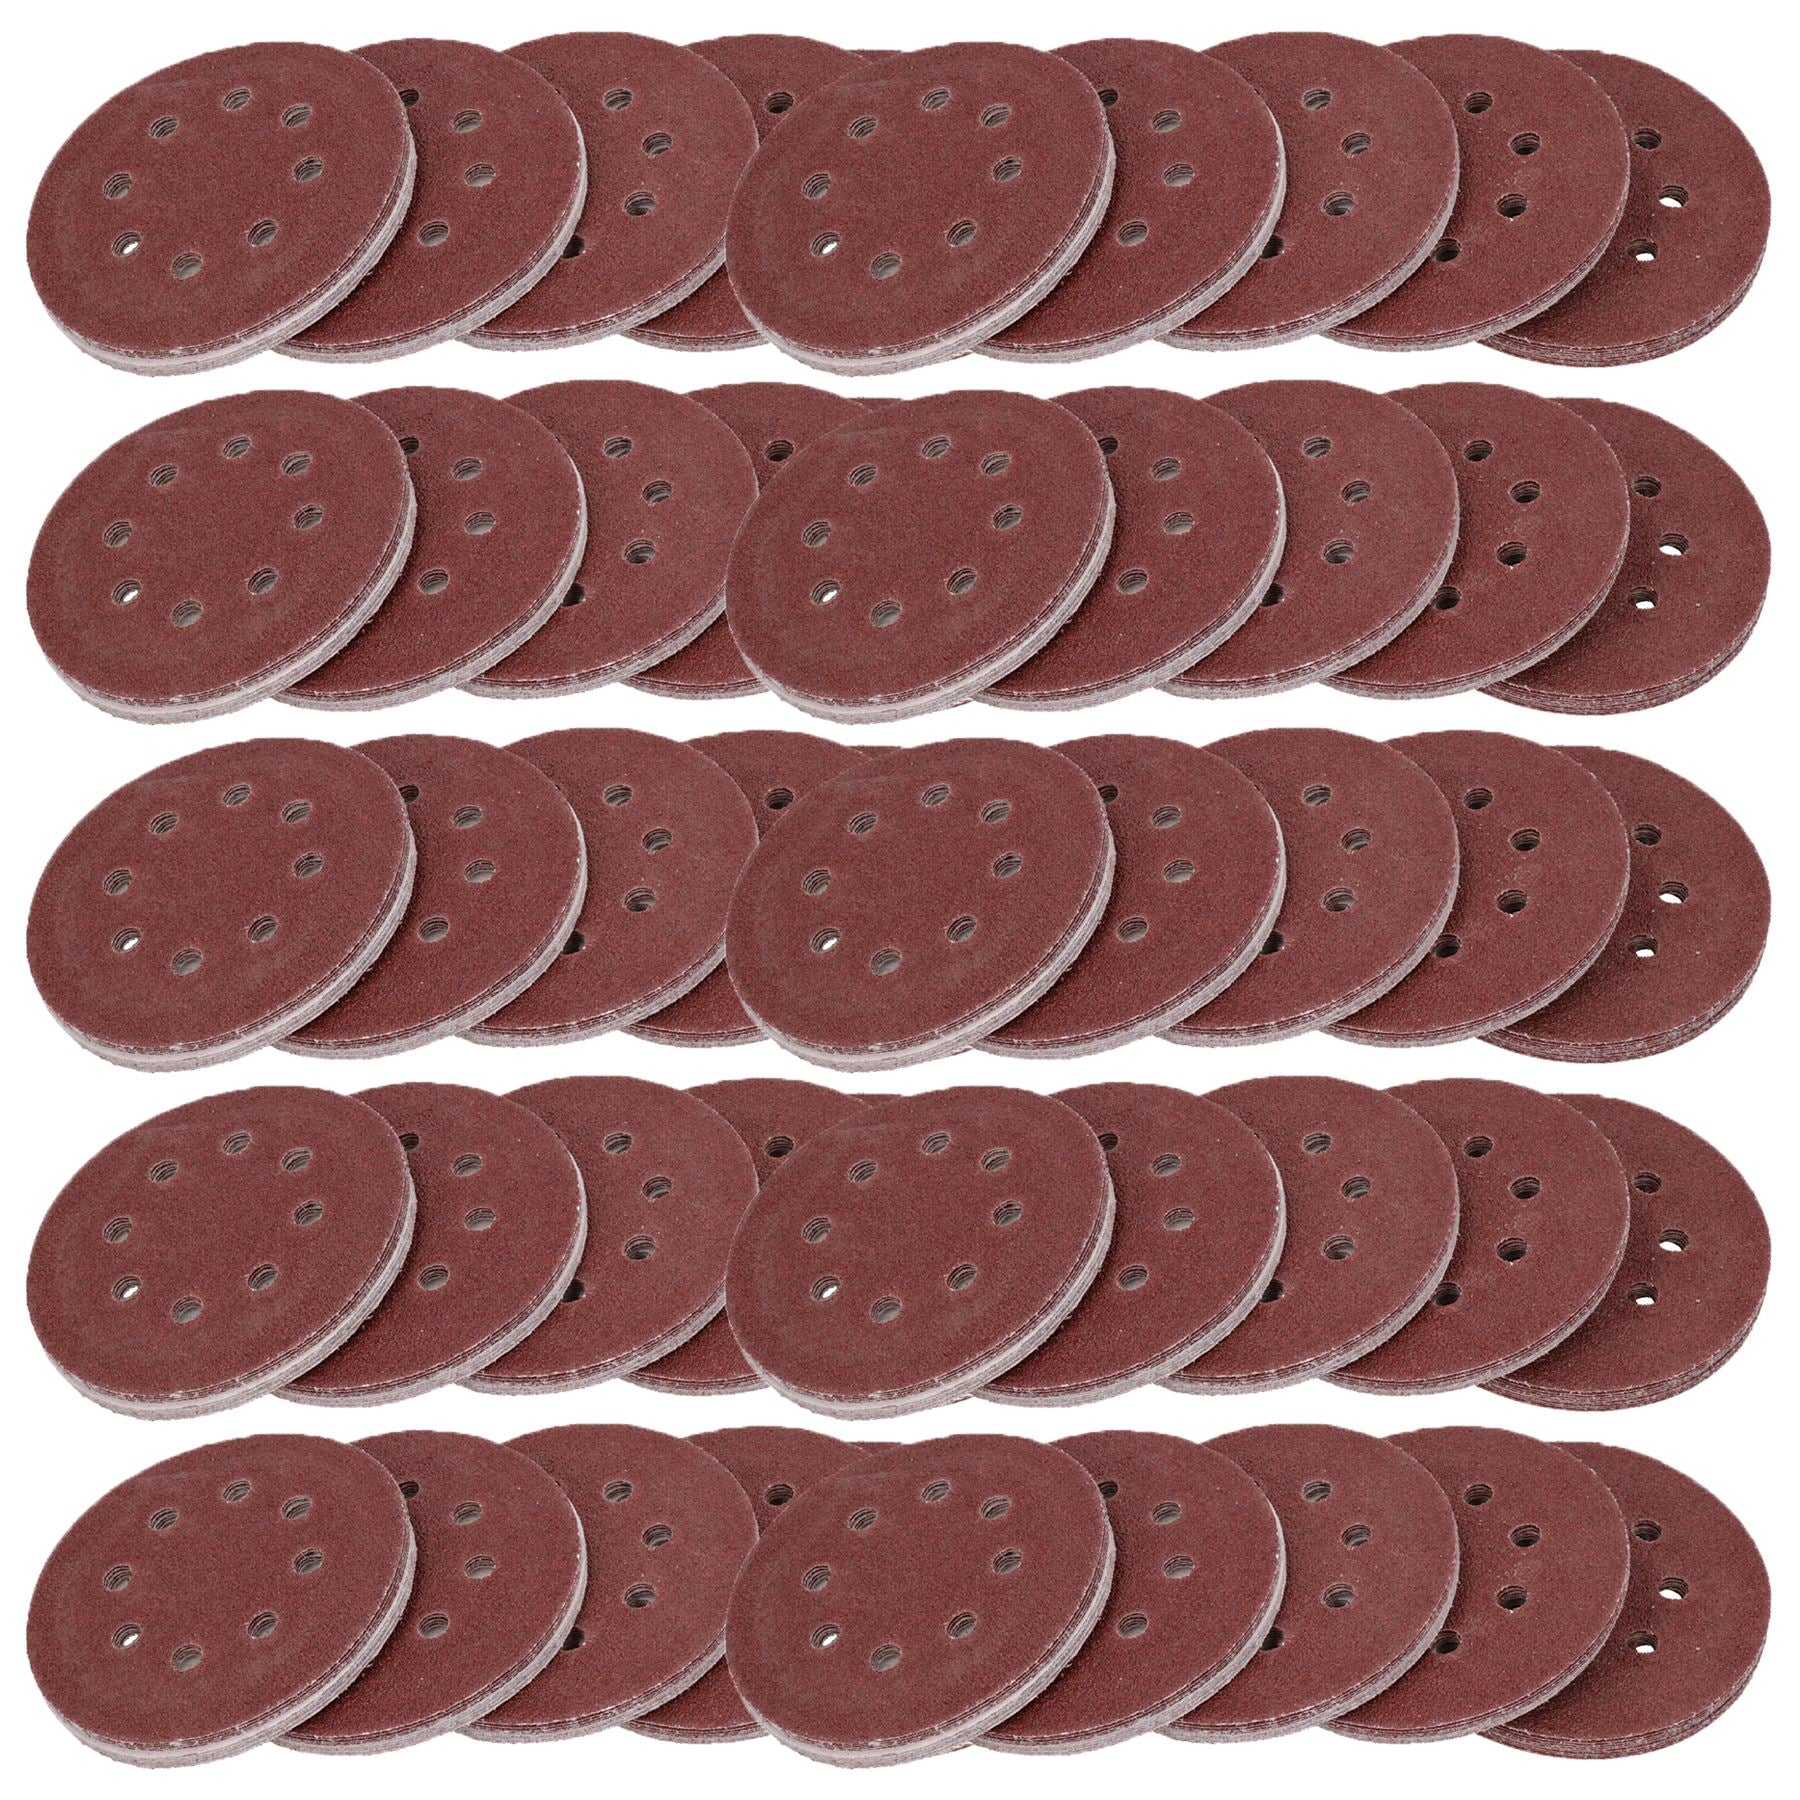 125mm Mixed Grit Hook And Loop Sanding Abrasive Discs Mixed Grit 40 – 240 Grits